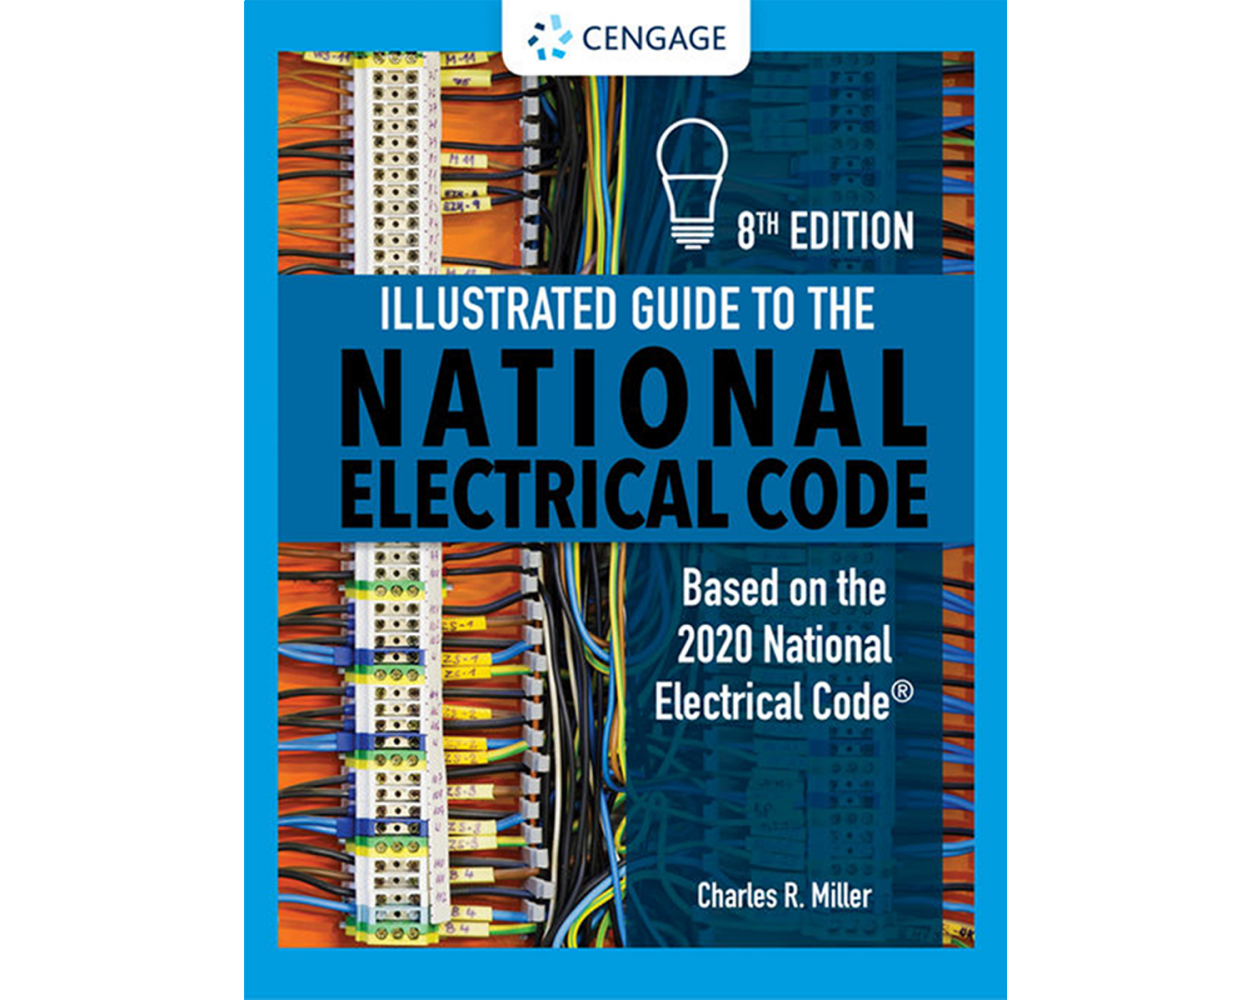 TEXTBOOK PDF the Complete Guide to Wiring: Current With 2017-2020